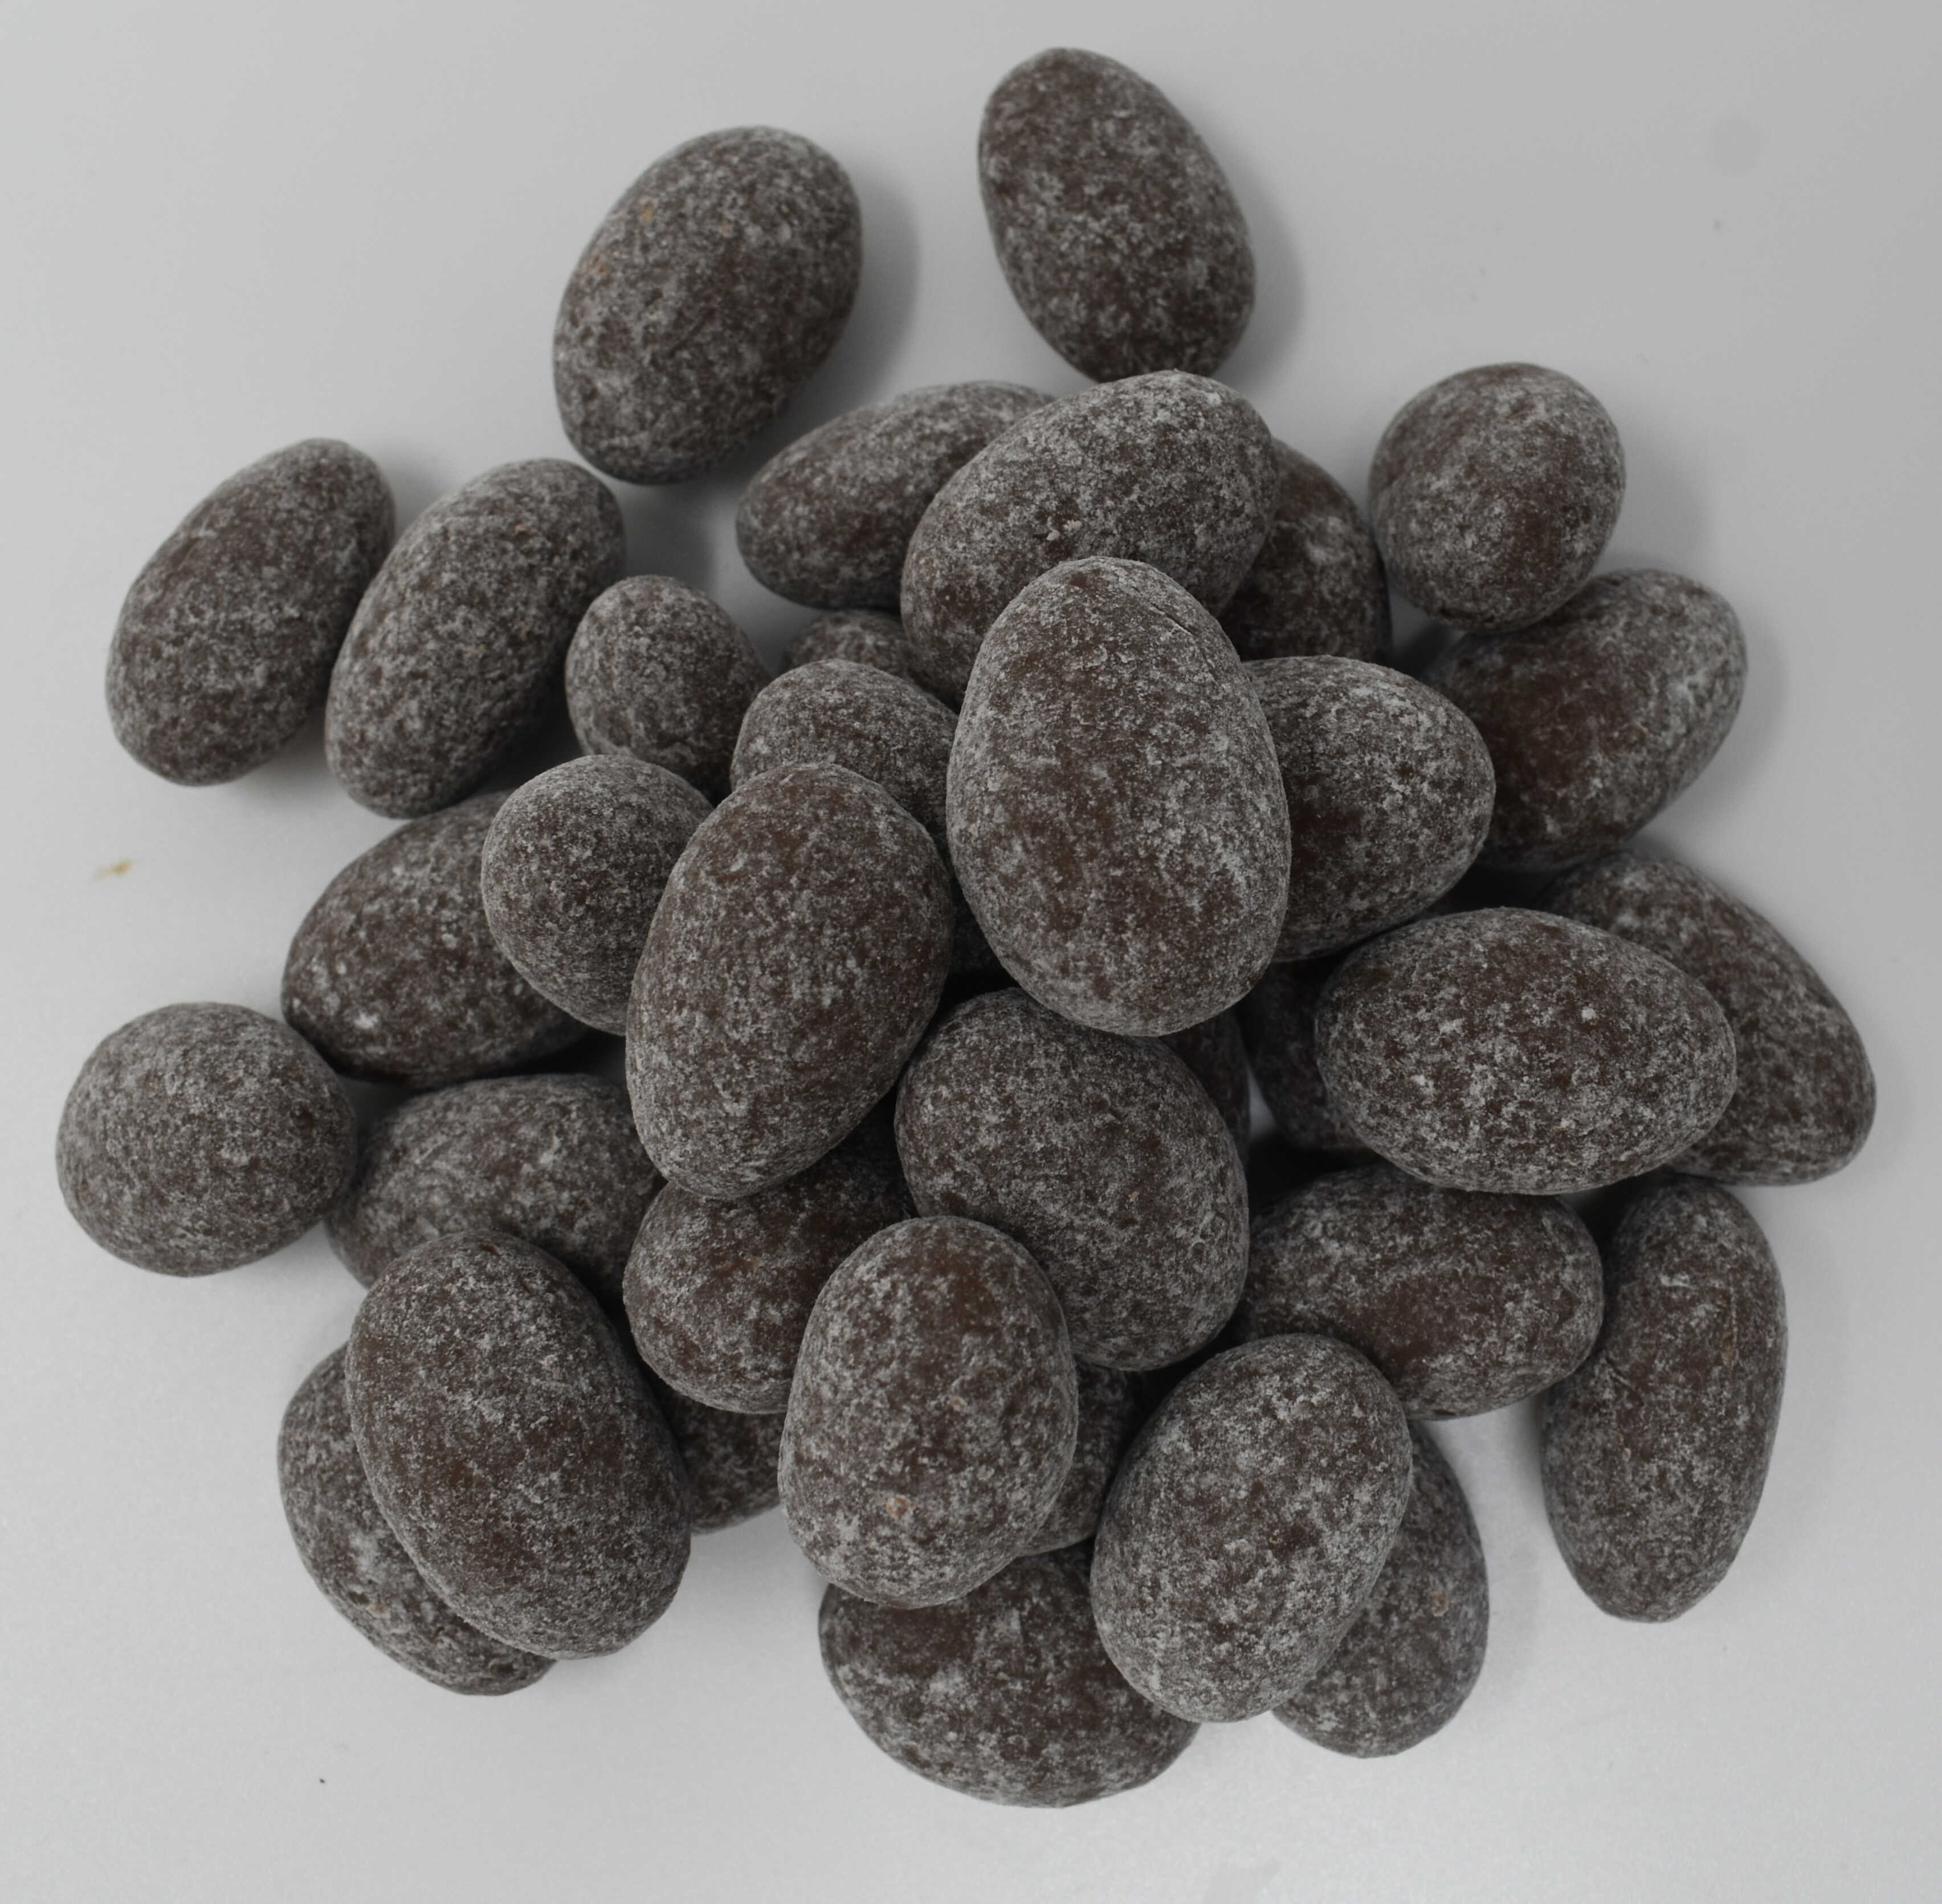 Chocolate Toffee Almonds - Top Photo